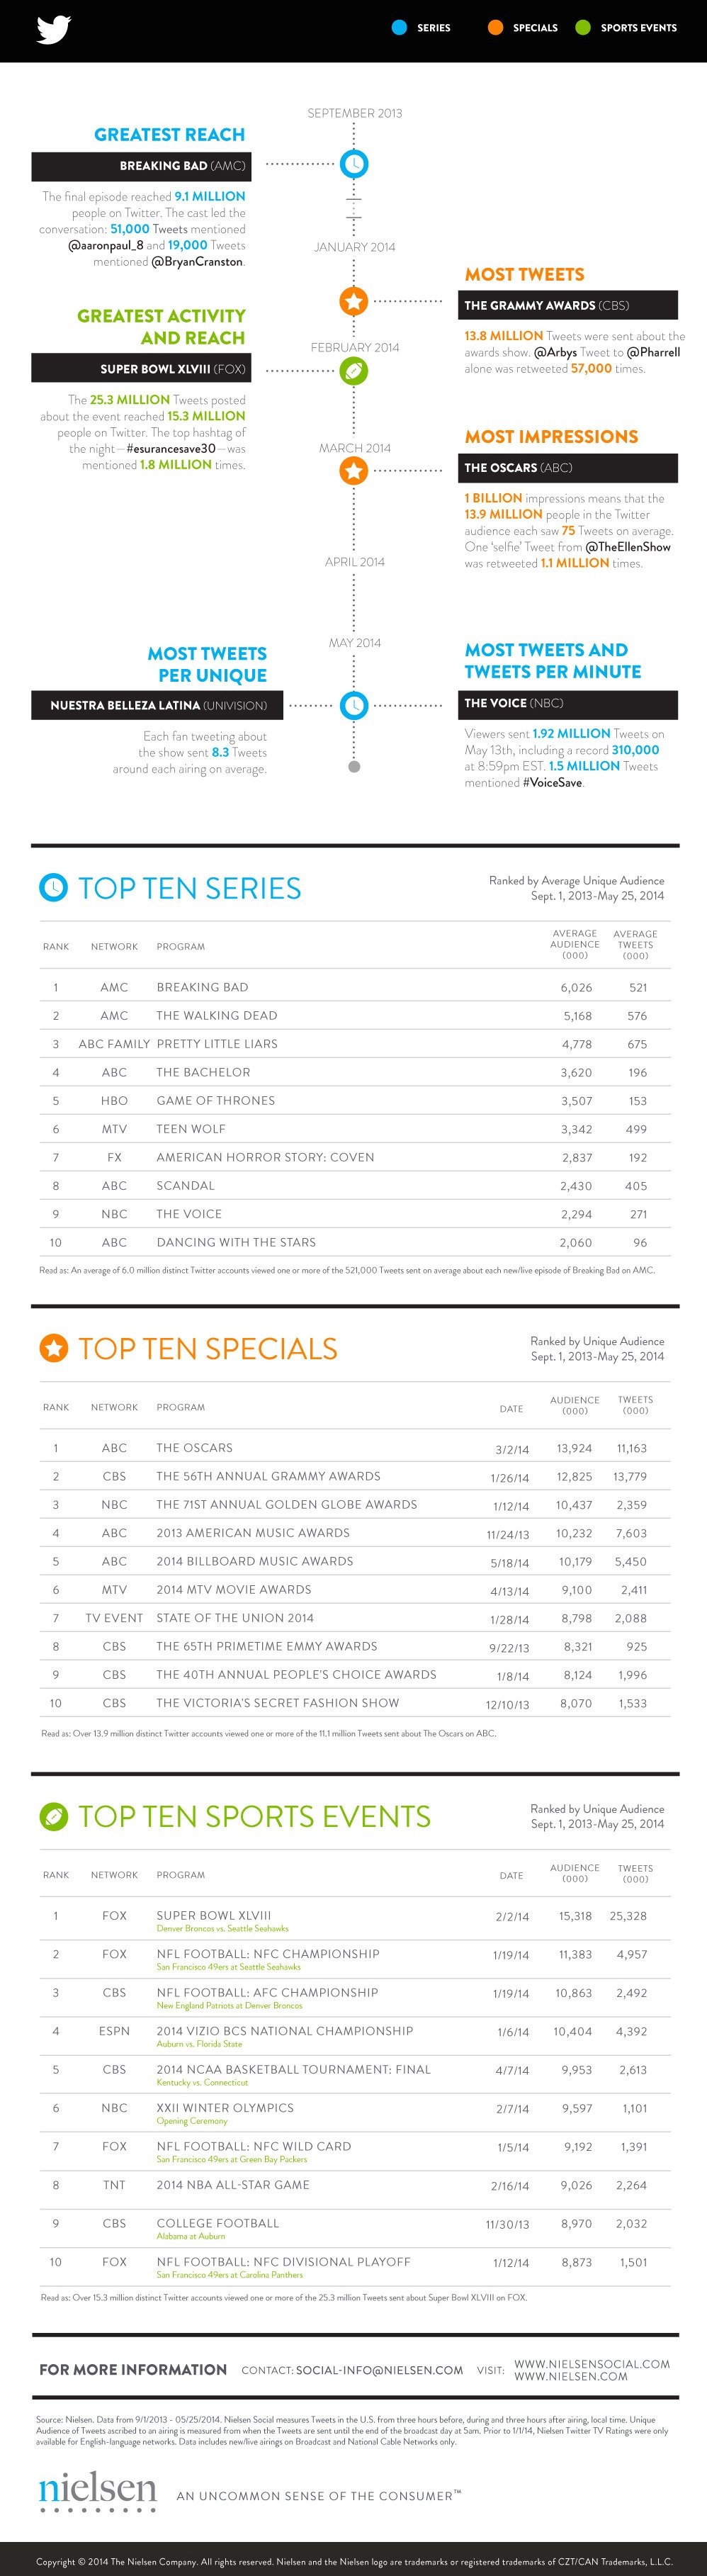 Top TV Shows 2013